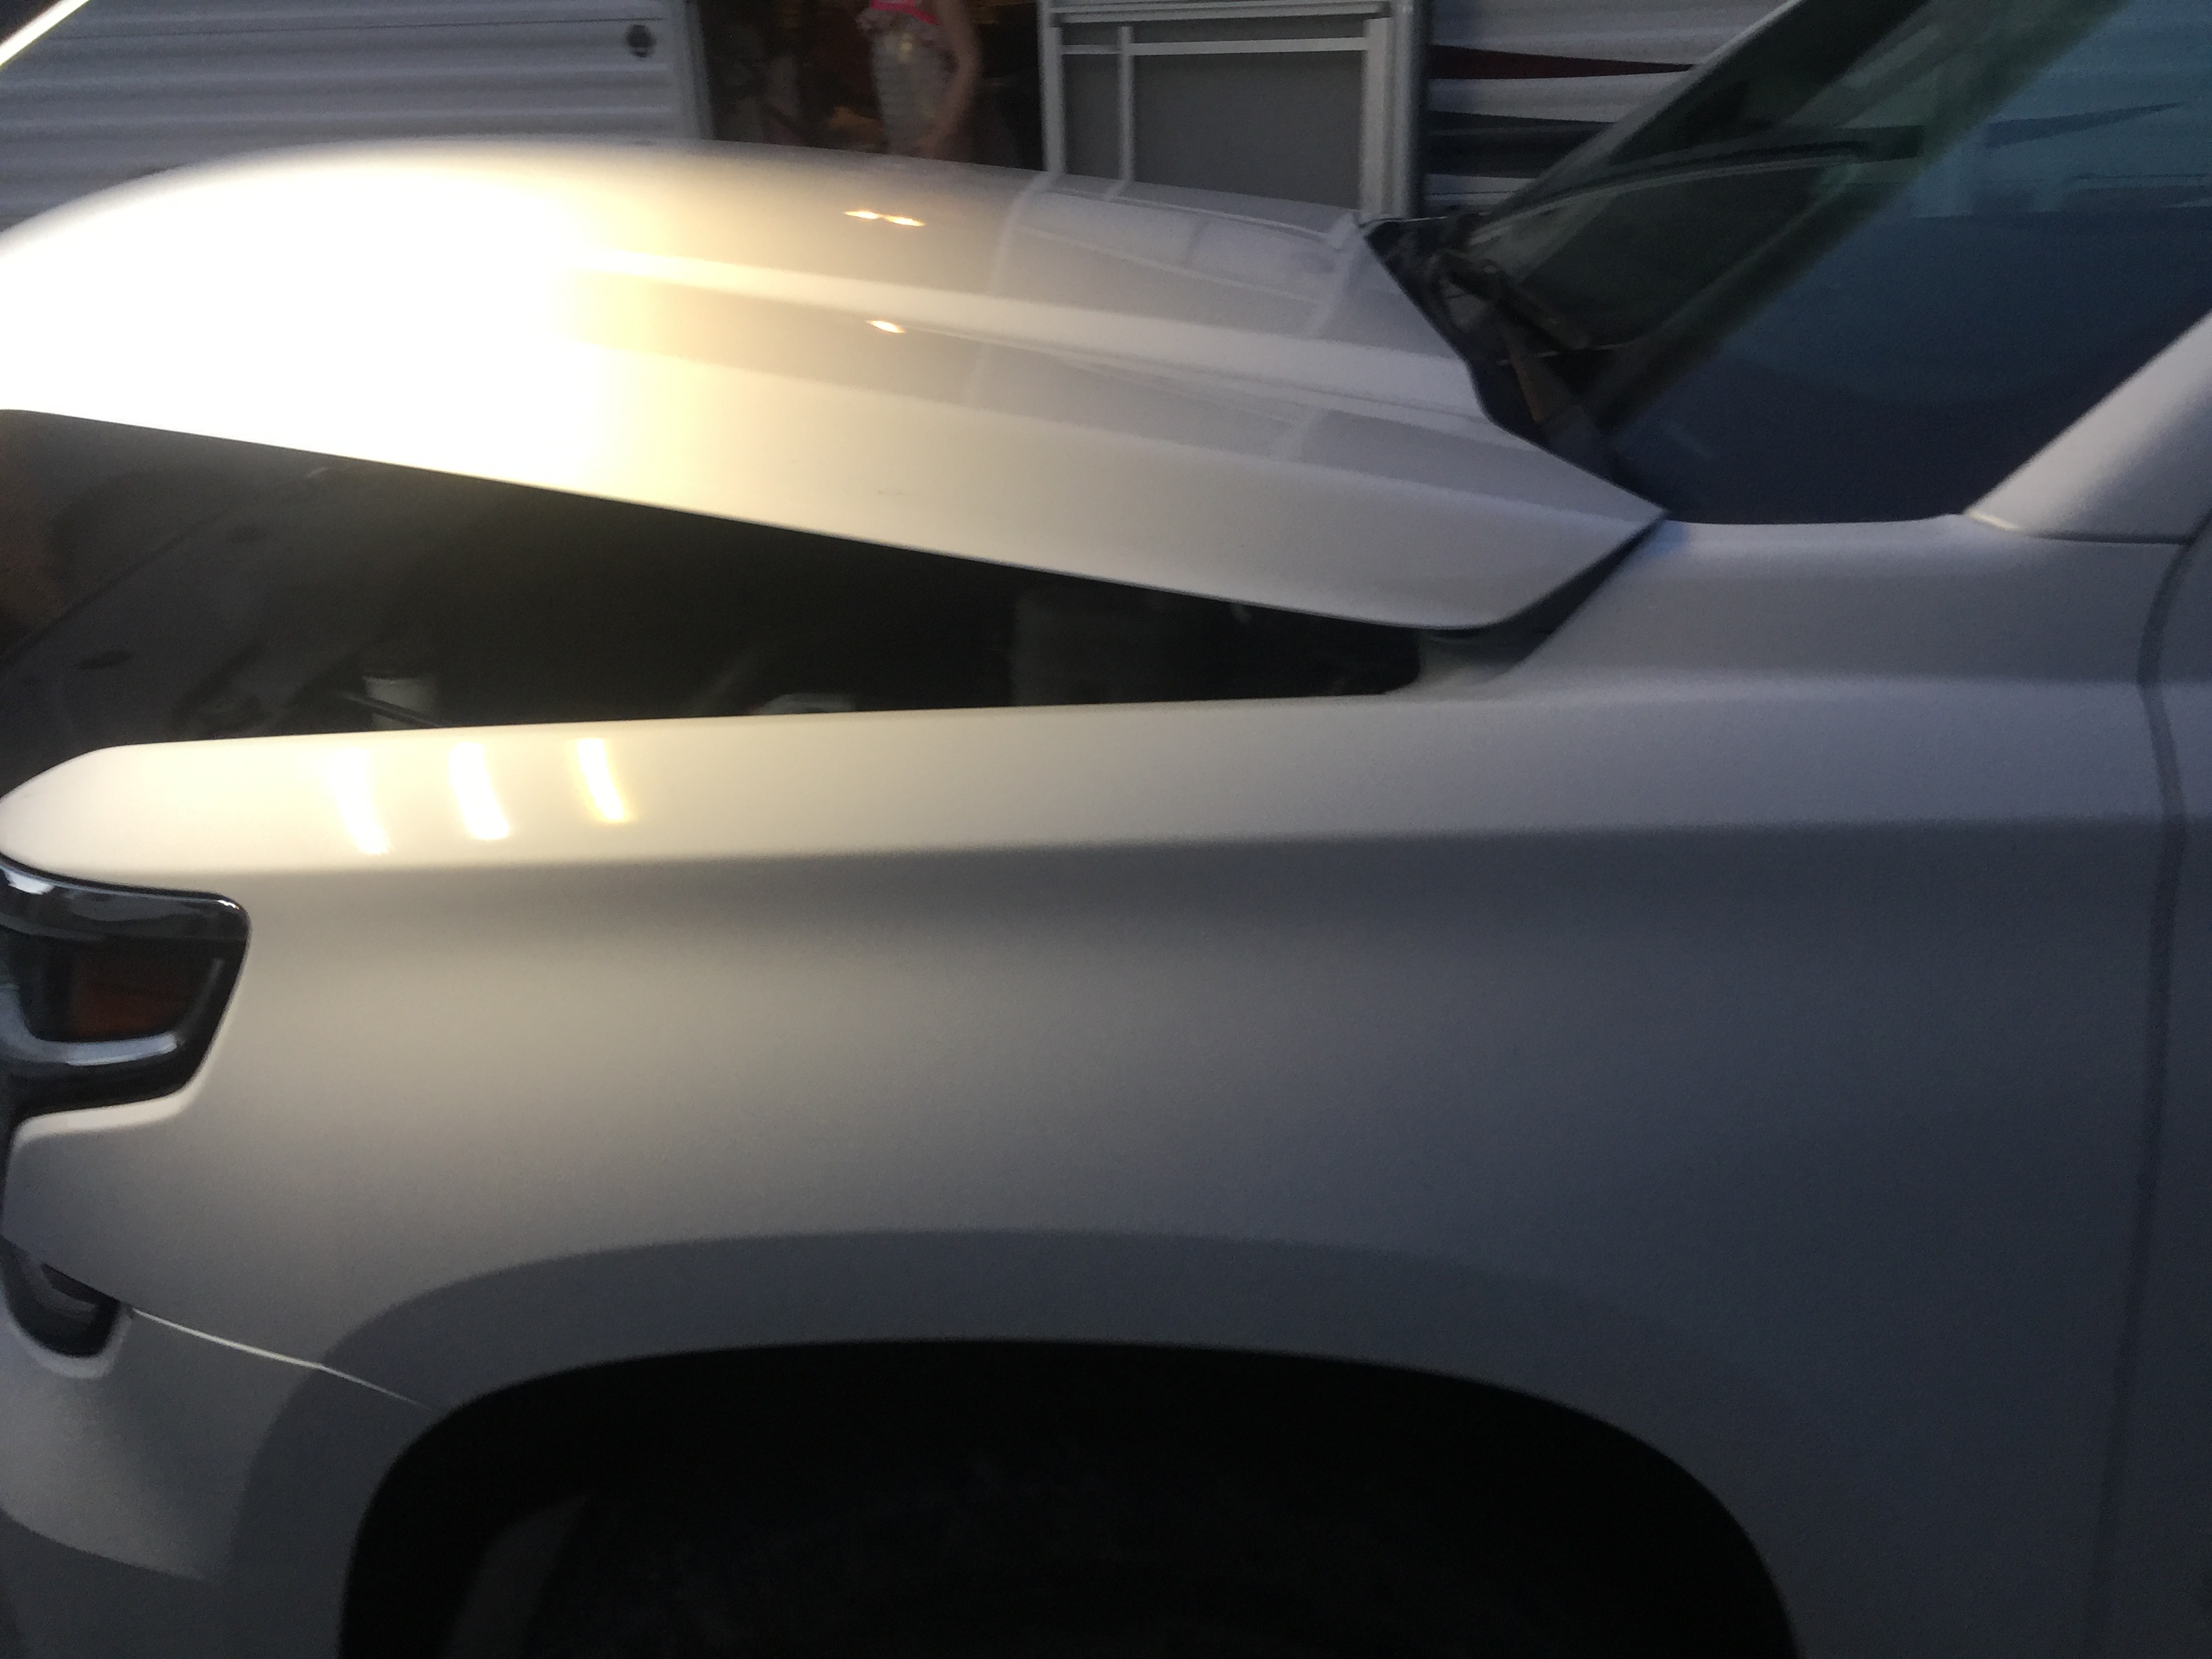 2016 Chevrolet Suburban, Dent Removal on Hood, Paintless Dent Removal Springfield IL, http://217dent.com